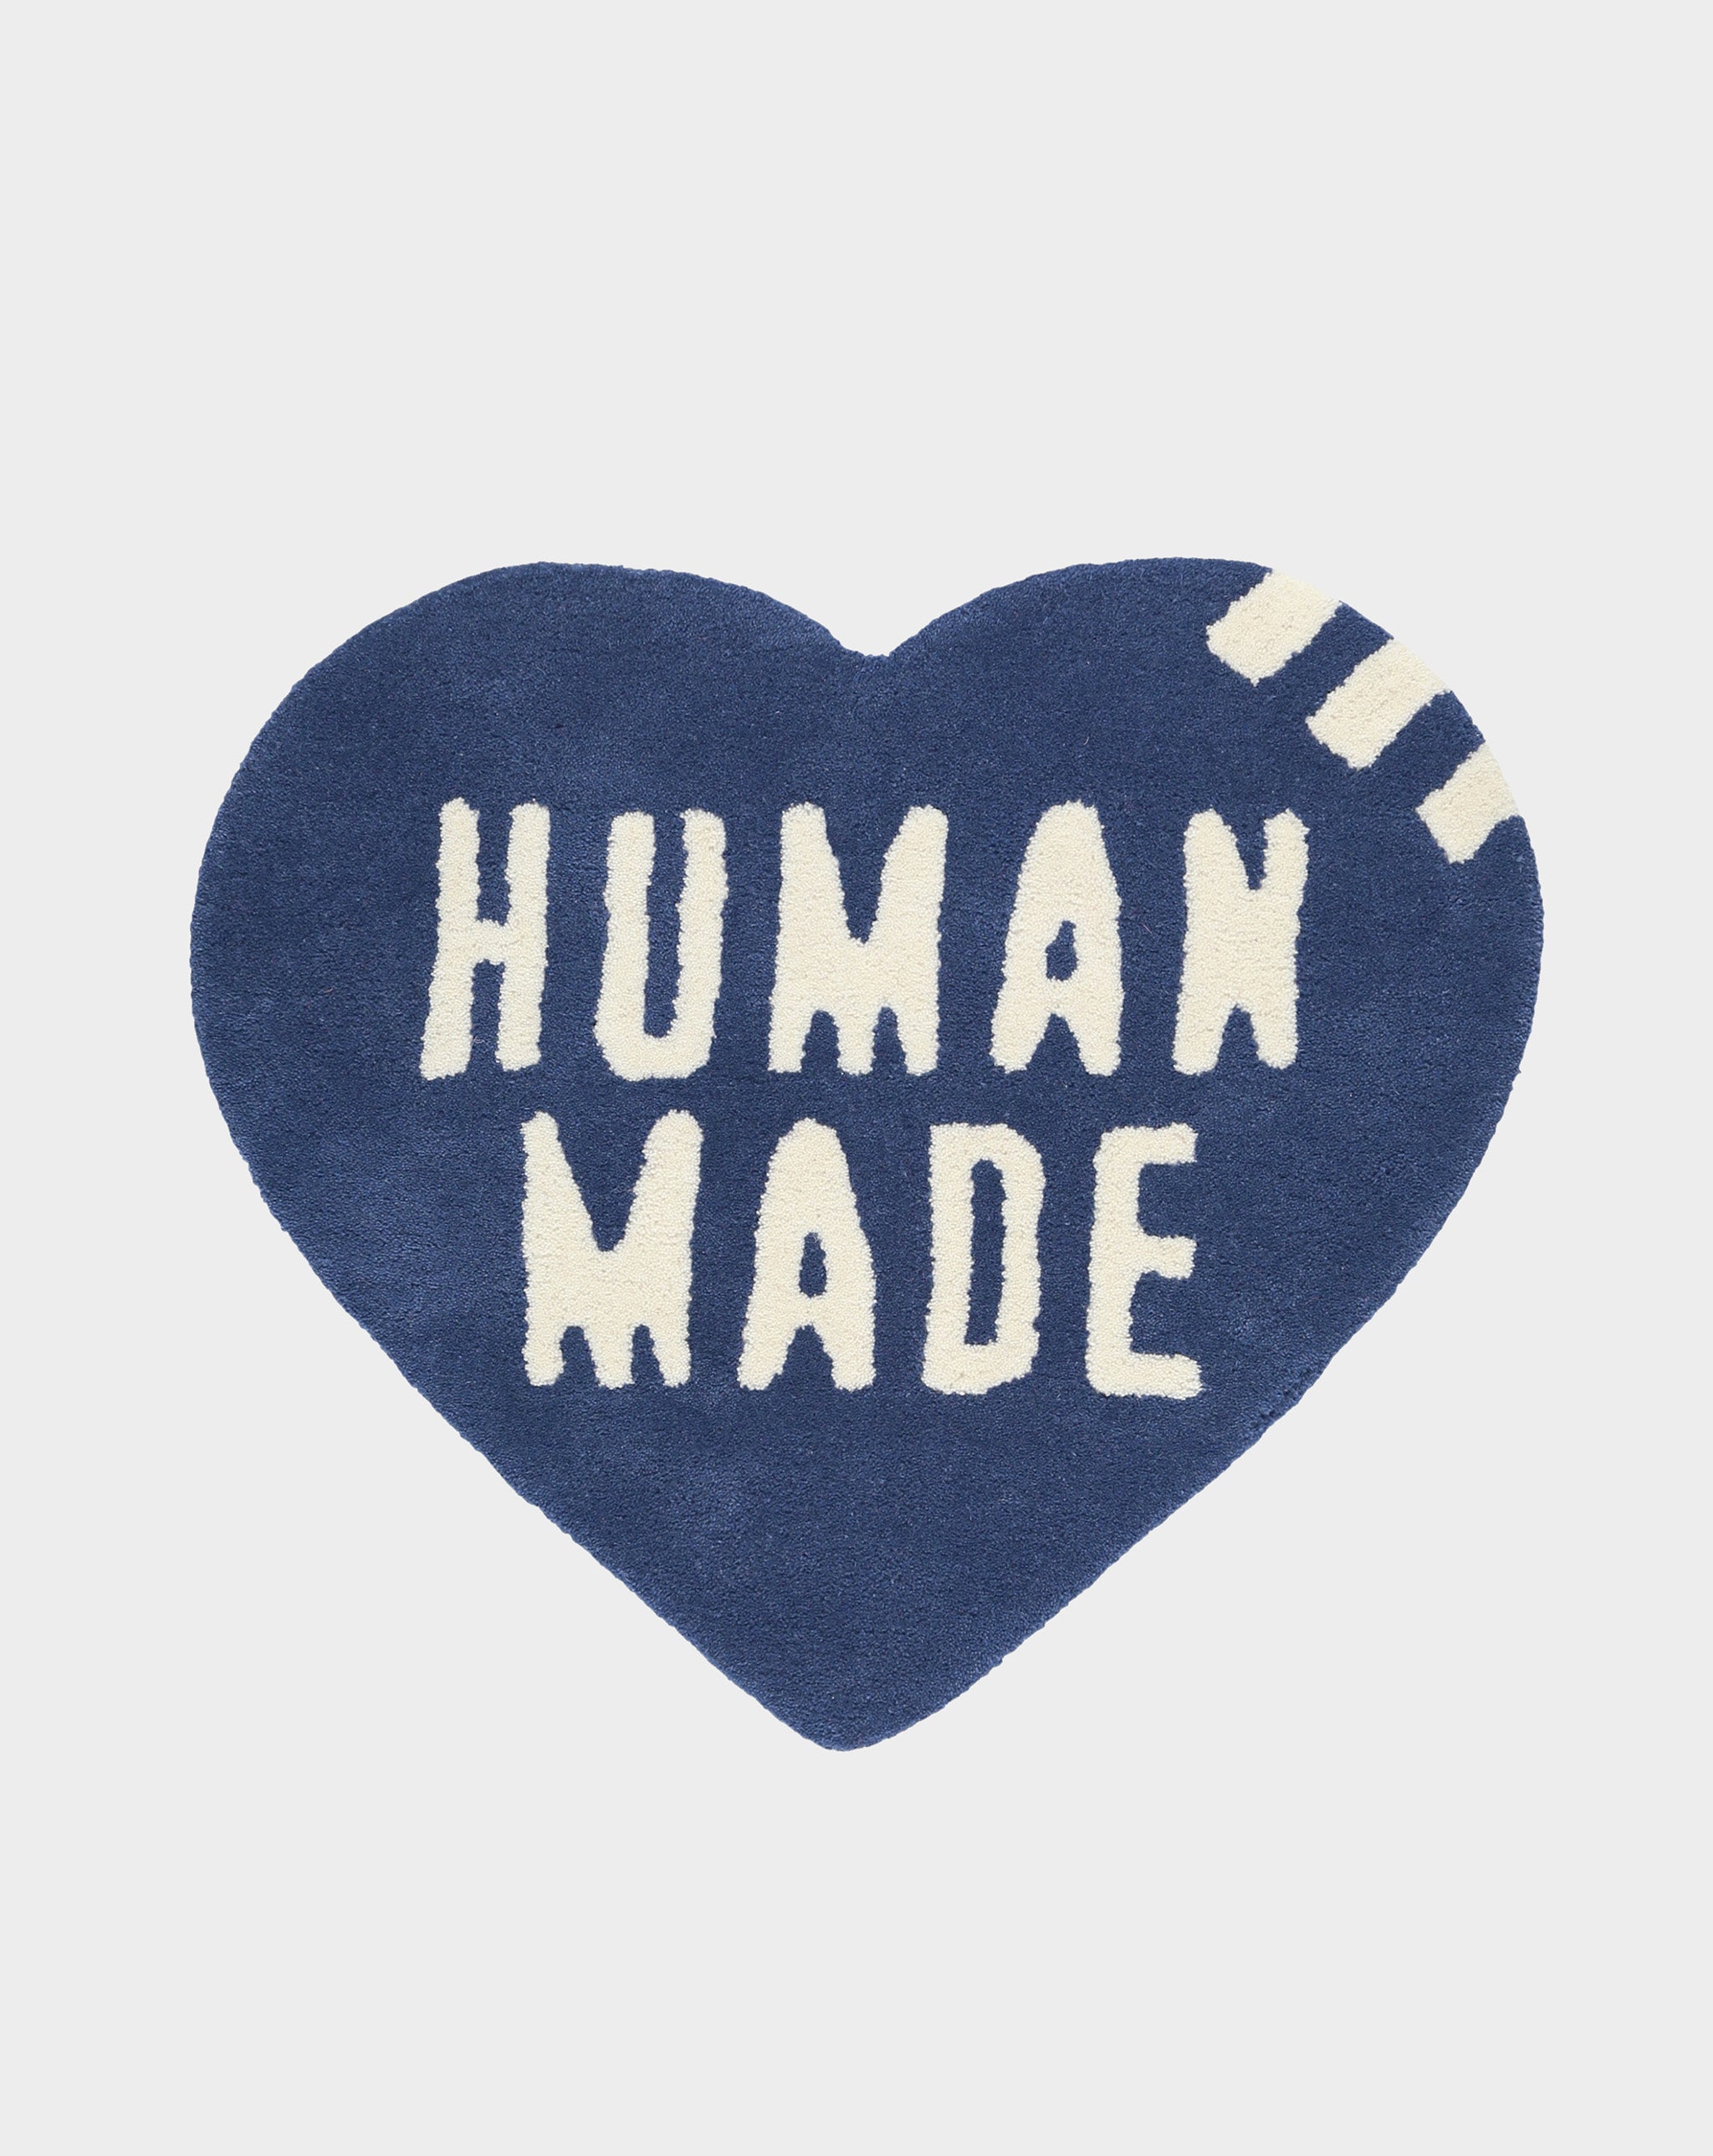 Human Made X Community Works  - Cheap Cerbe Jordan outlet